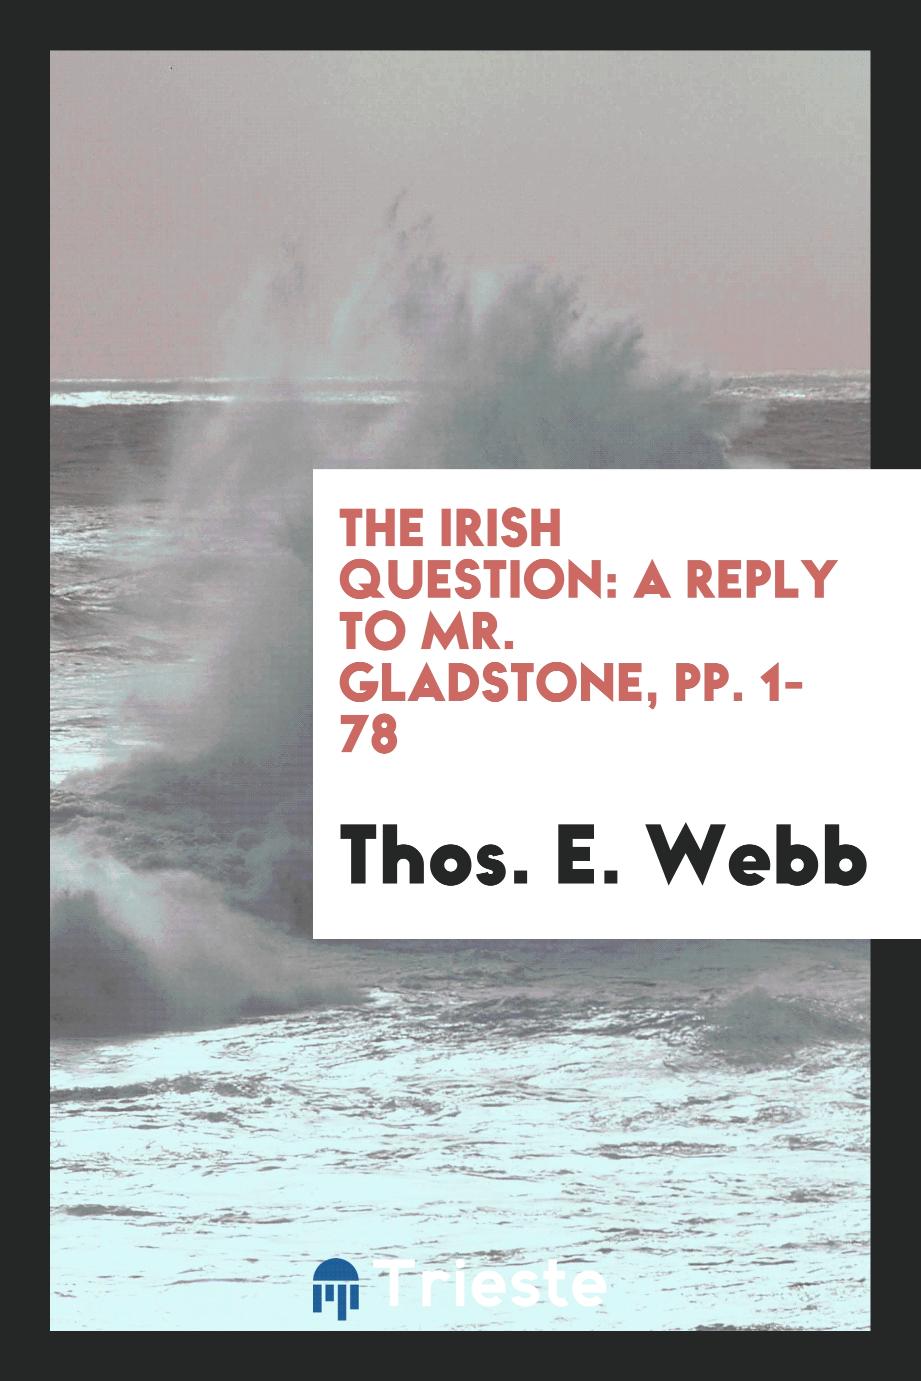 The Irish Question: A Reply to Mr. Gladstone, pp. 1-78